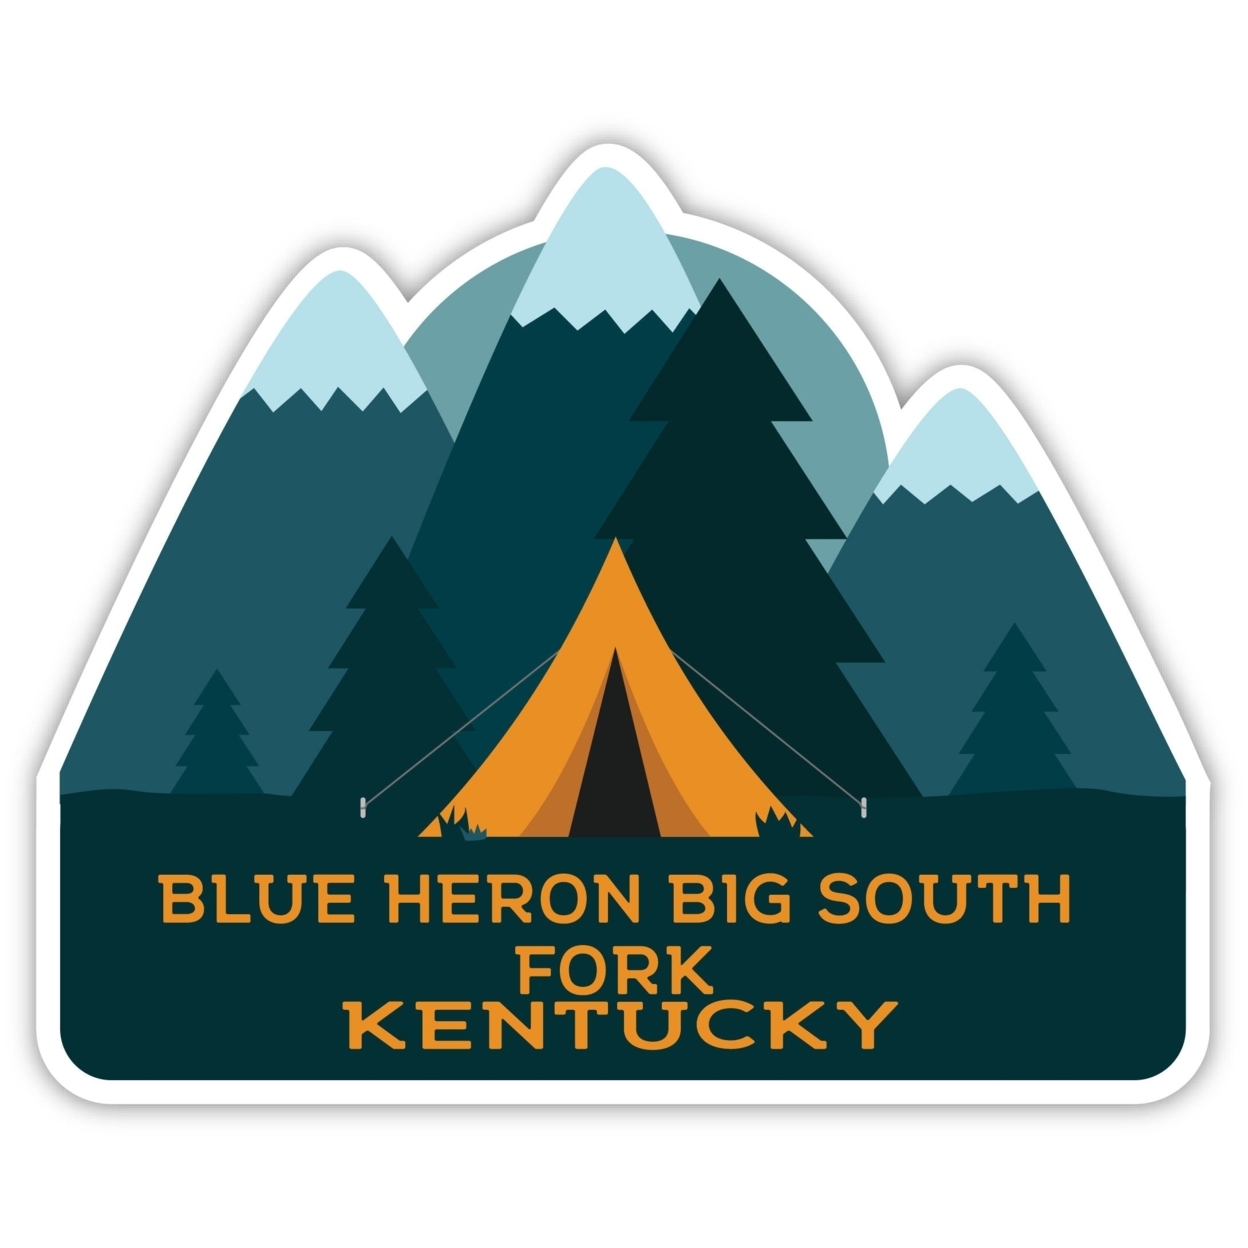 Blue Heron Big South Fork Kentucky Souvenir Decorative Stickers (Choose Theme And Size) - 4-Pack, 10-Inch, Tent